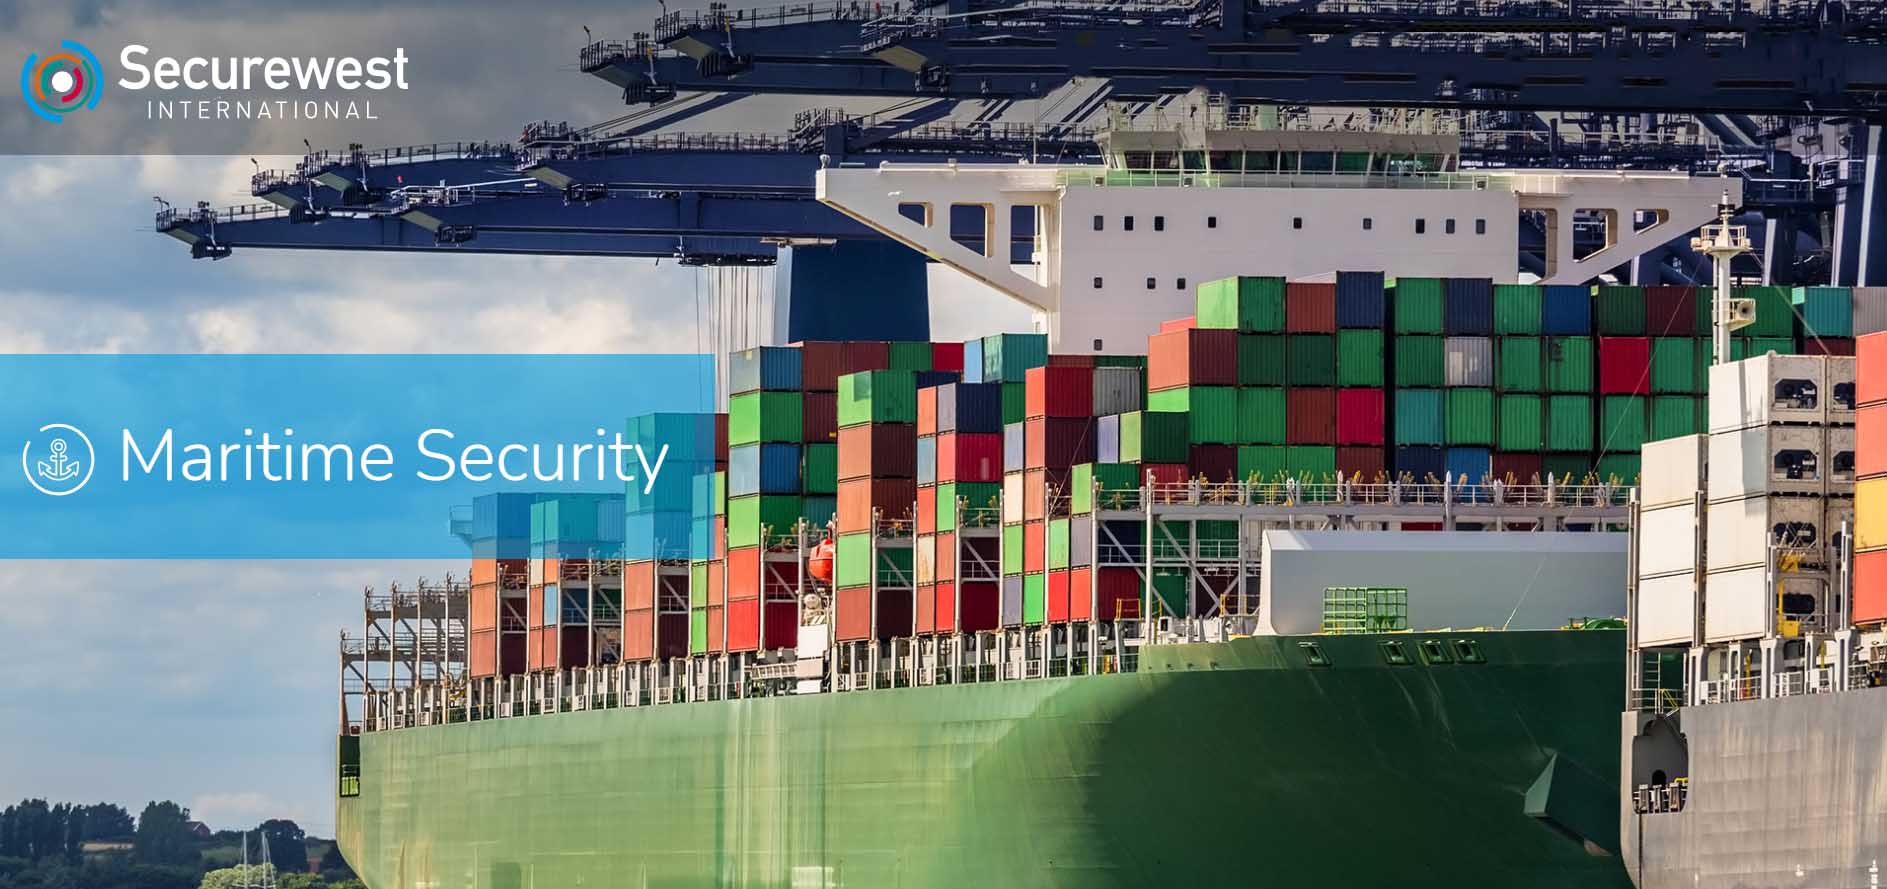 Securewest International- A Maritime Security Company